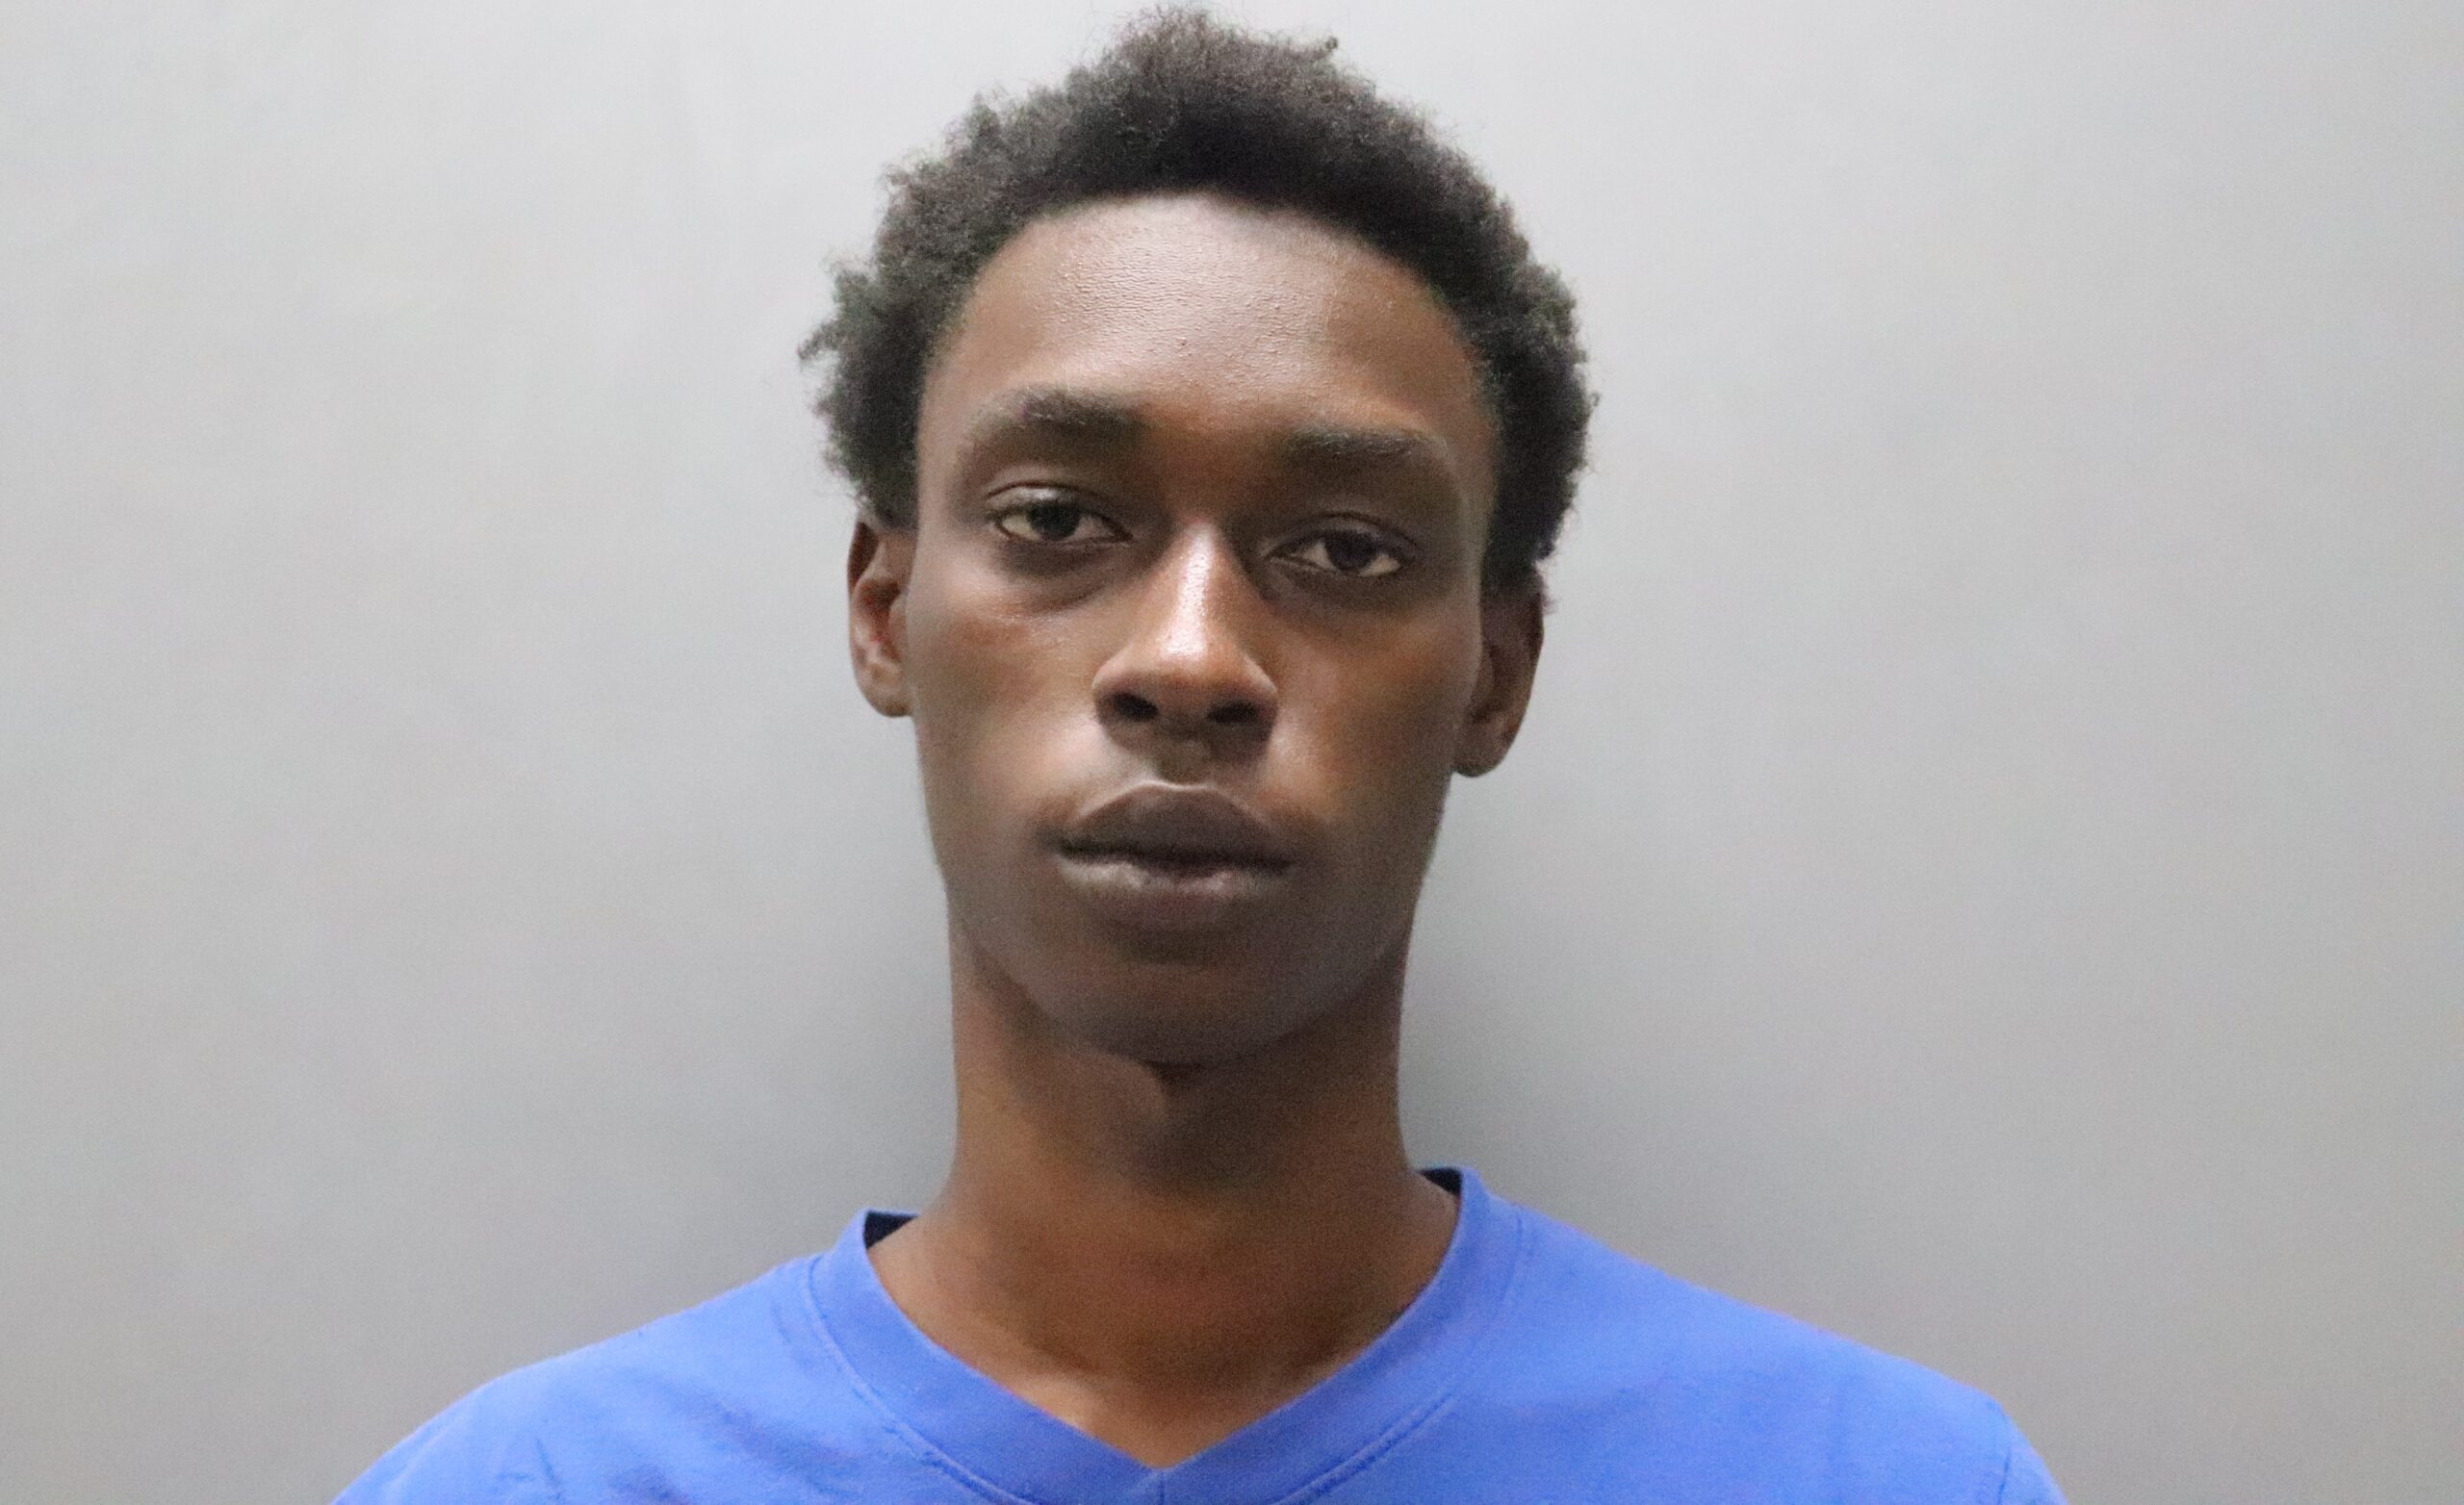 Police Arrest 18-Year-Old, Detain 3 Minors, In Glitters Jewelry Store Robbery: VIPD